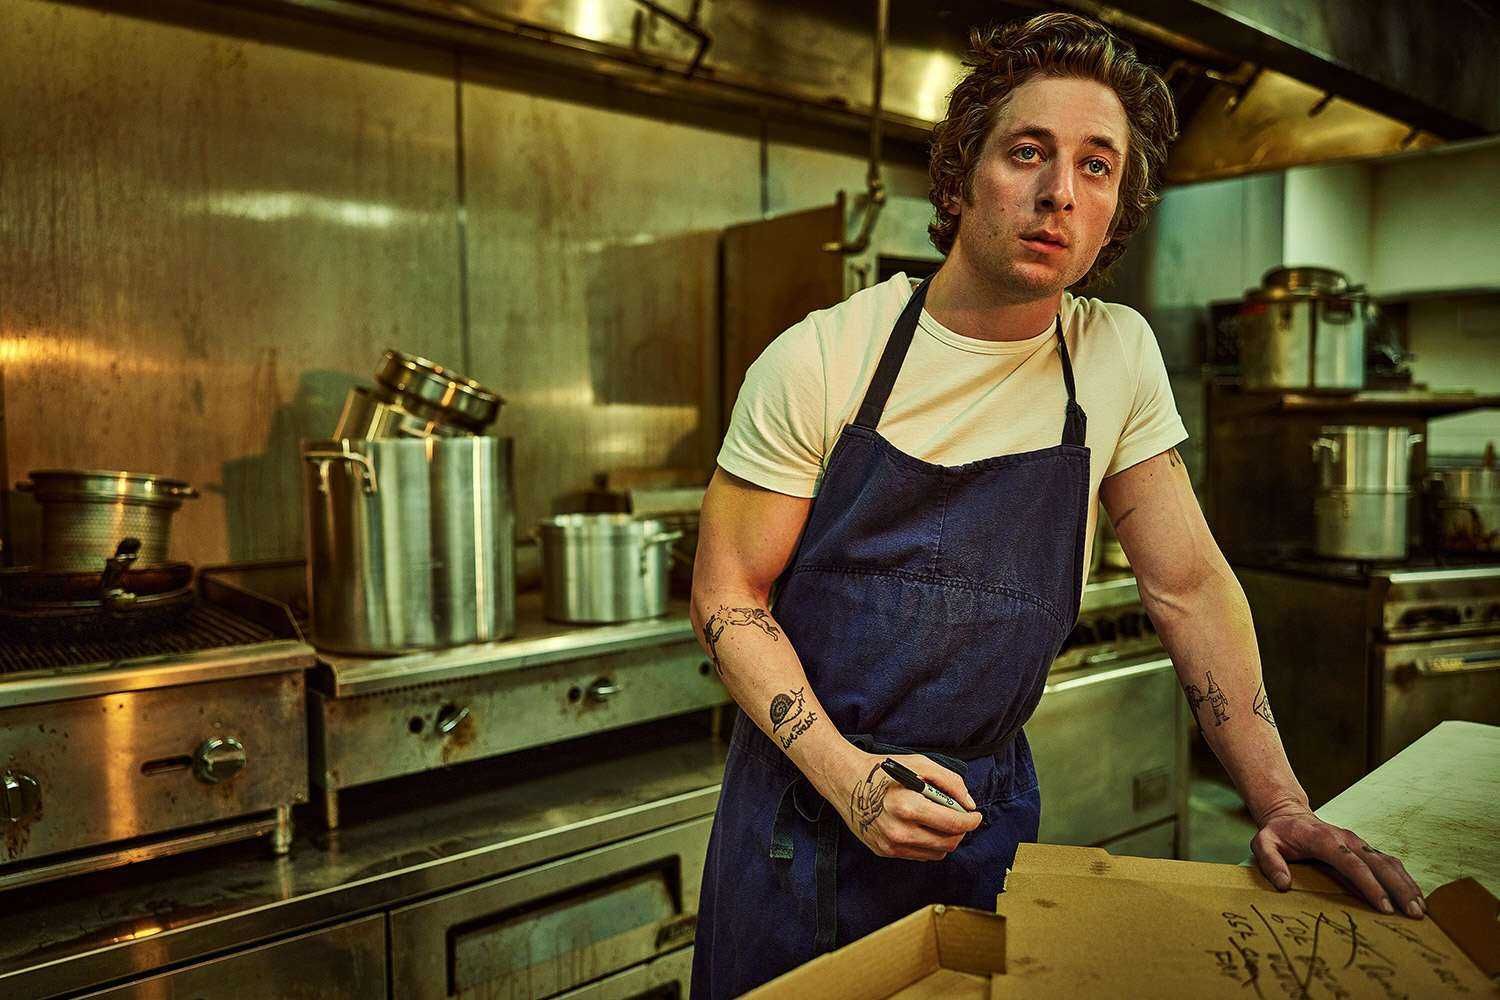 'I feel like with this, I don't need much else' - The Bear's Jeremy Allen white spills his daily essentials